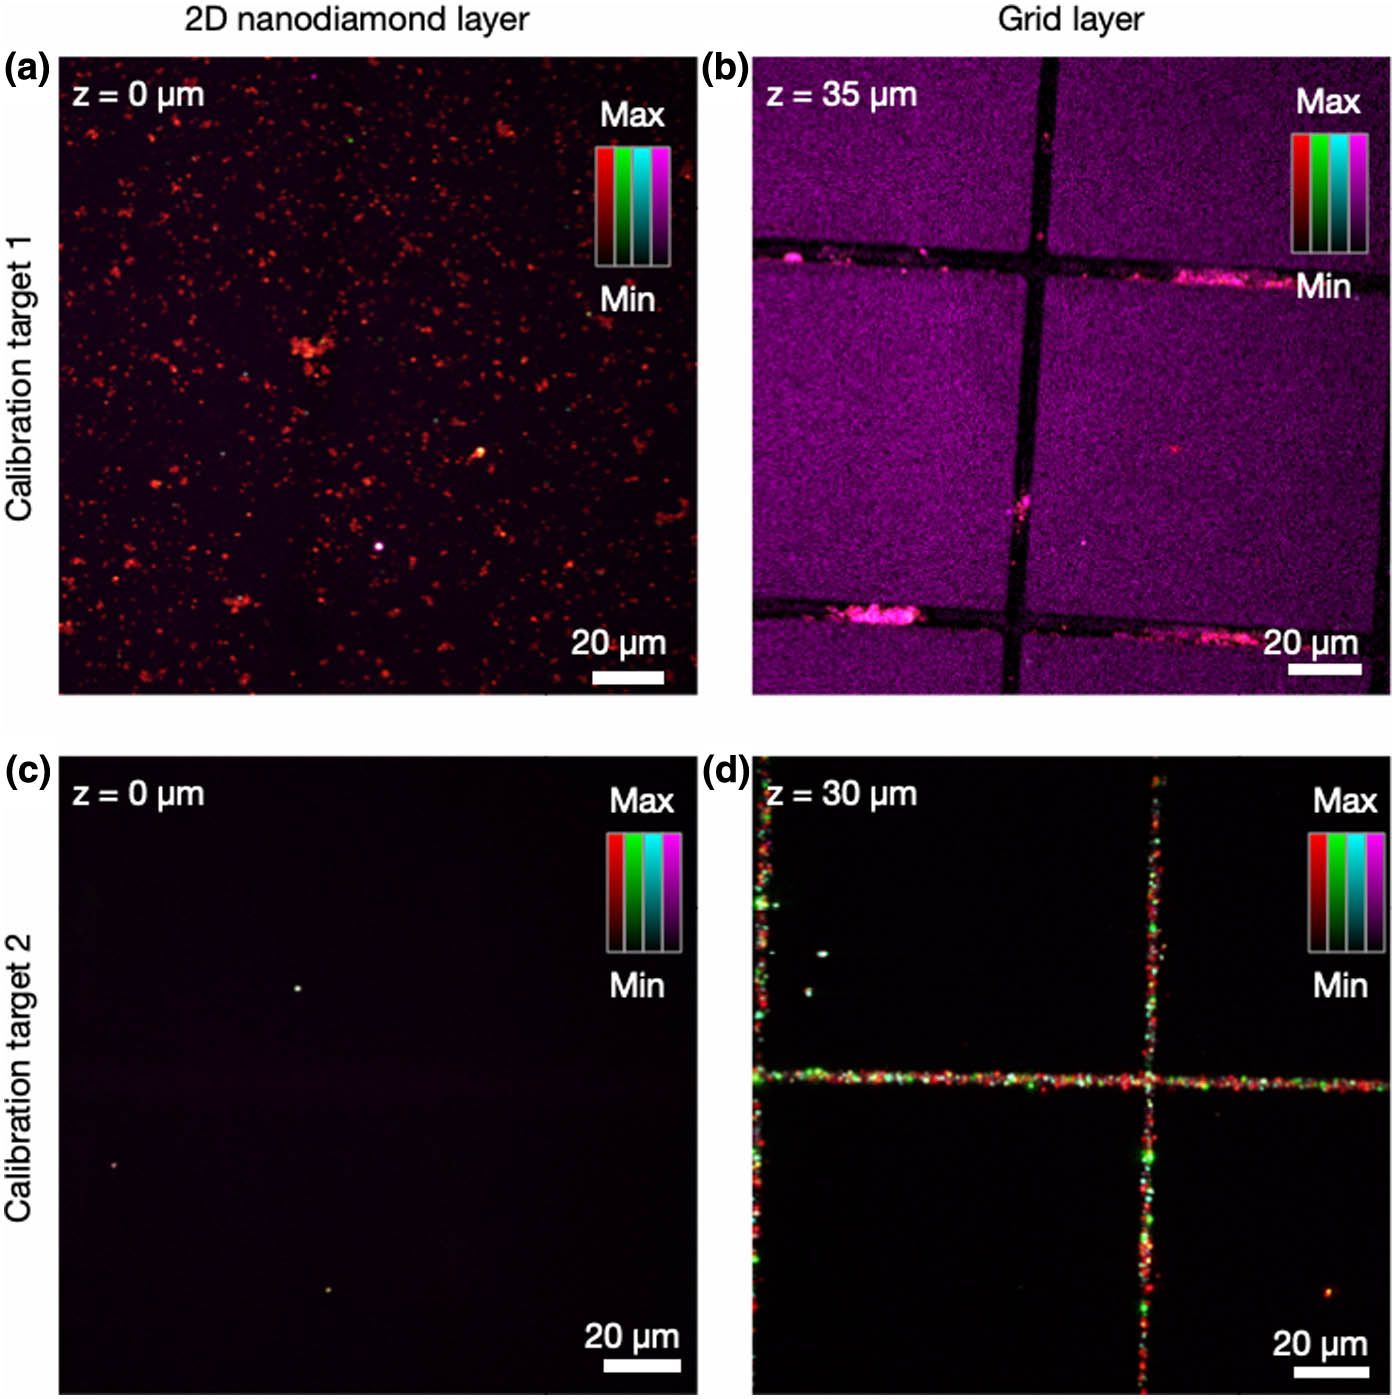 Simultaneous four-channel multiphoton imaging of different types of calibration targets. (a) A dense lawn of 100 nm nanodiamond particles with NV color centers. (b) Locator grid with embedded 100 nm nanodiamonds is strongly visible in purple as well as in red channels. (c) Sparse nanodiamond particles deposited on a coverslip. (d) Locator grid with embedded 700 nm nanodiamond particles.